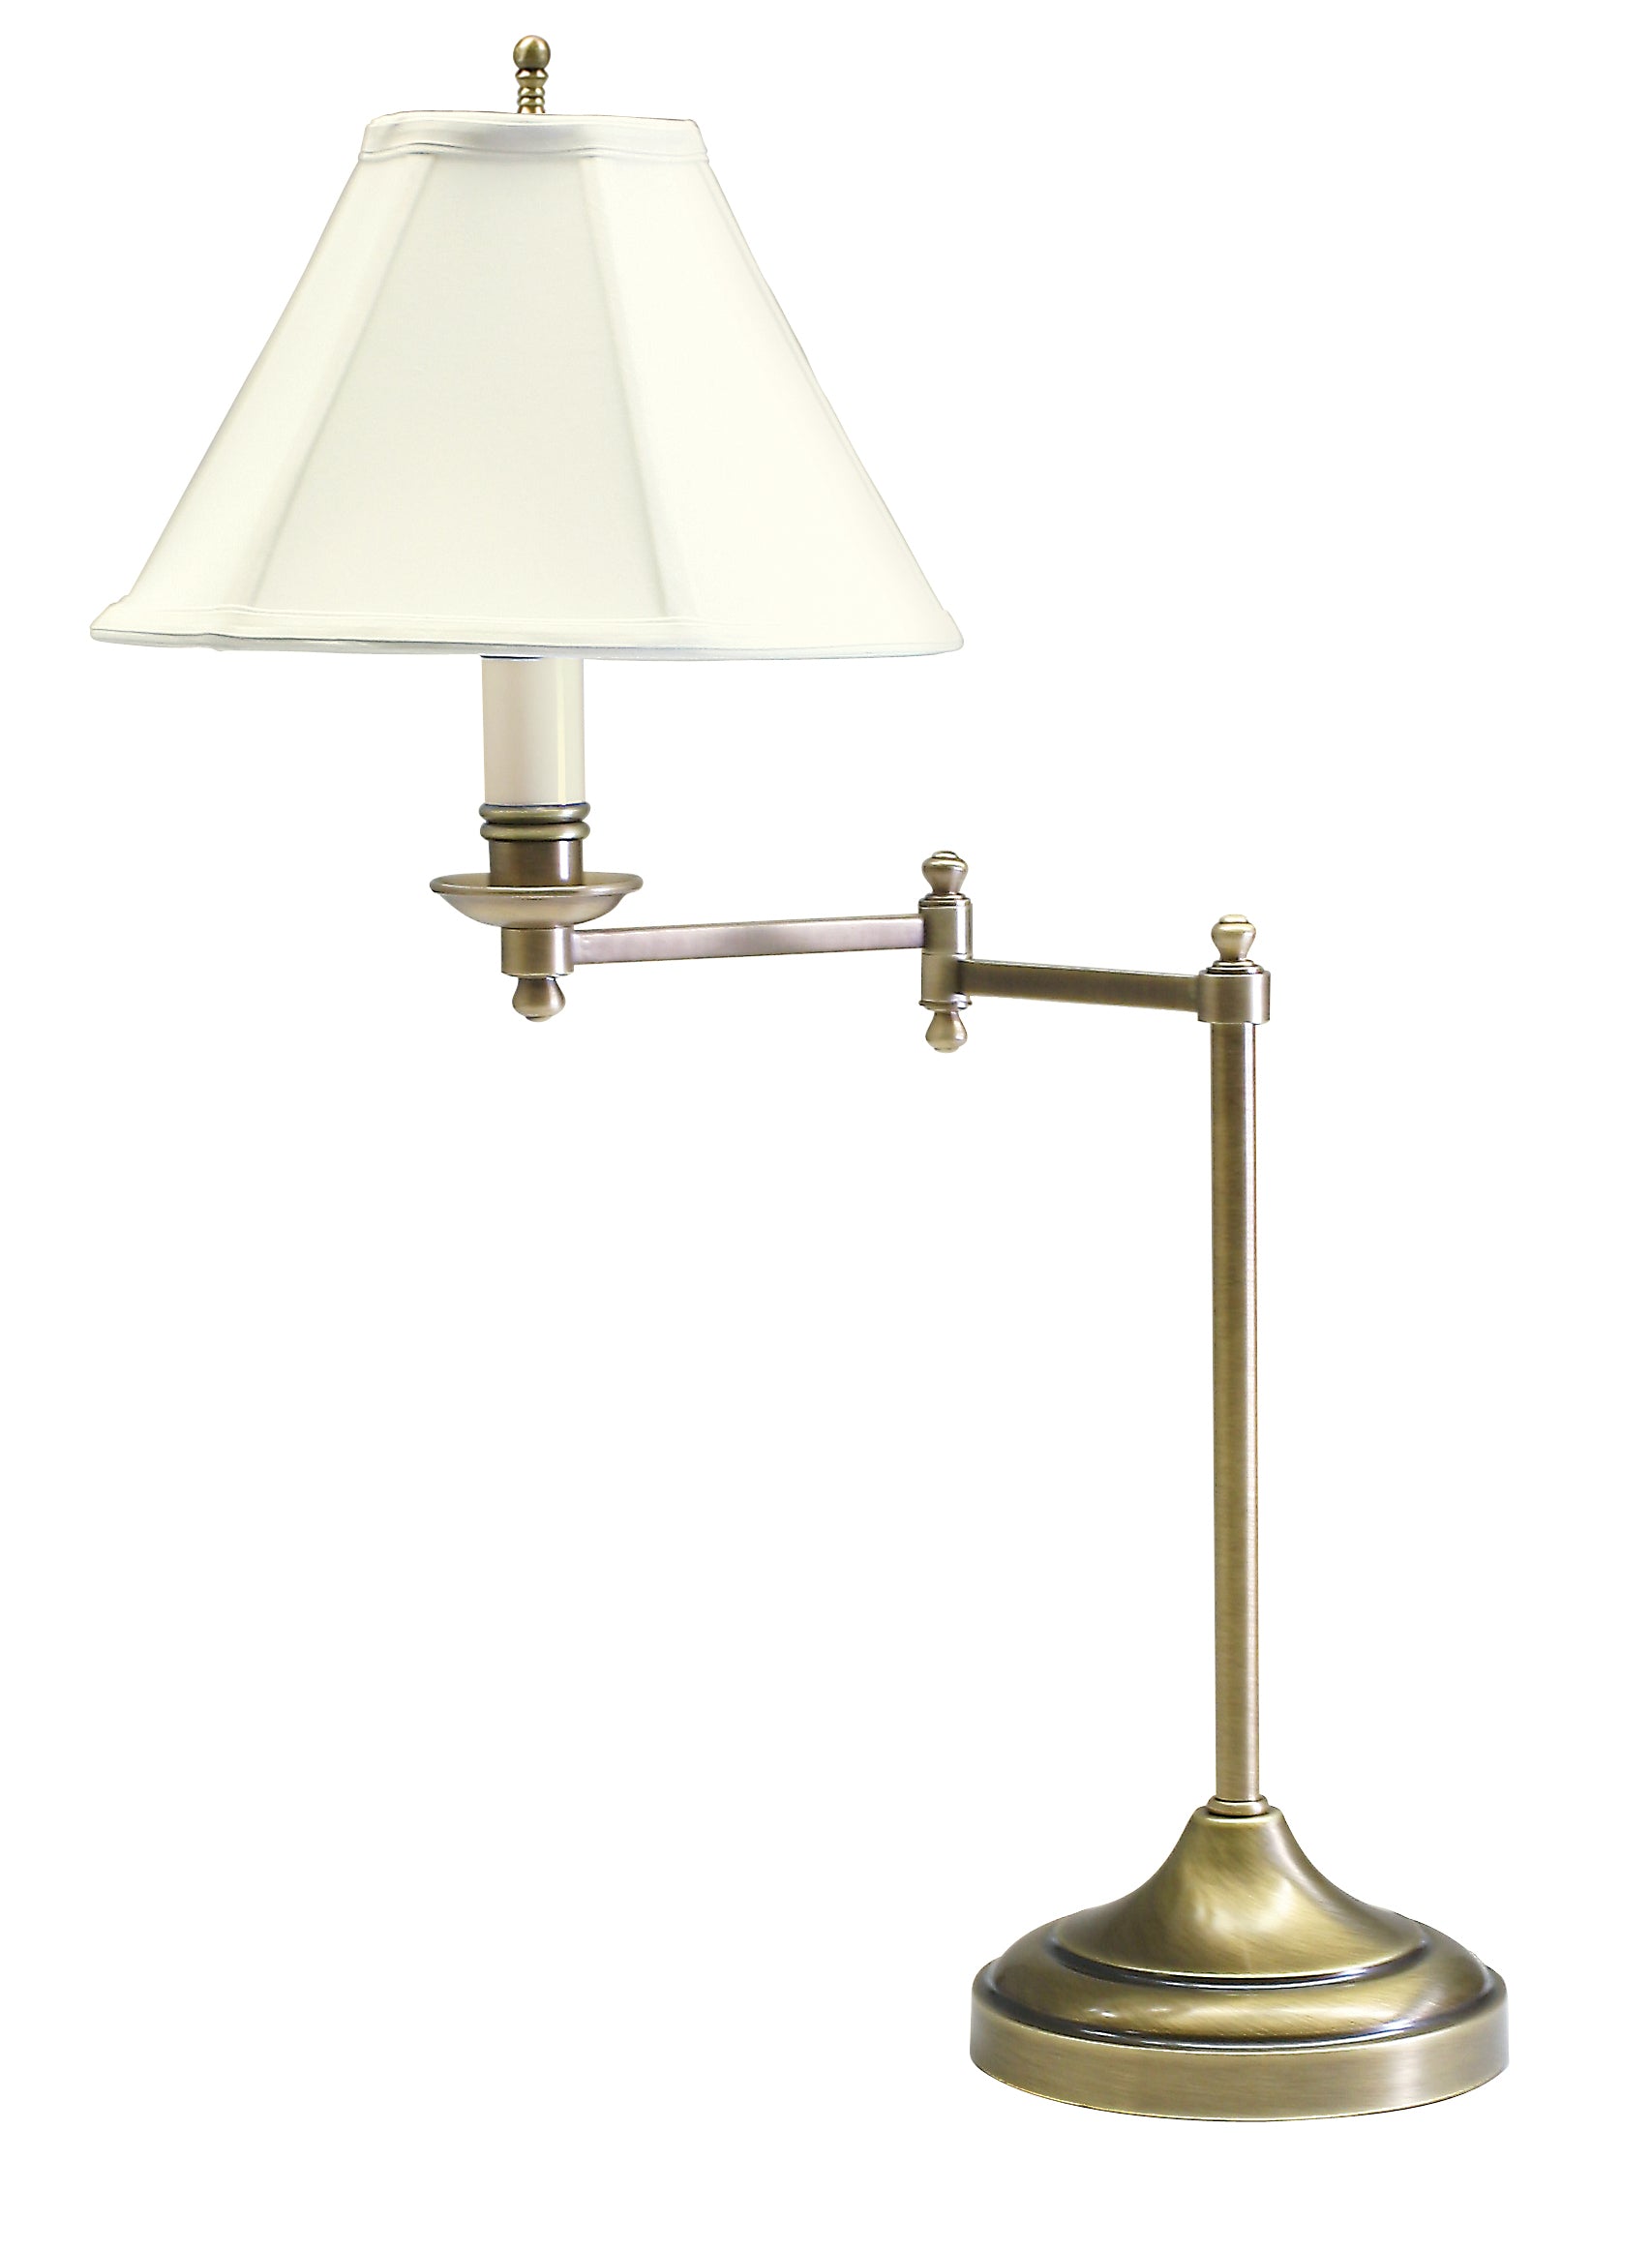 House of Troy Club 25" Antique Brass Table Lamp Swing Arm CL251-AB